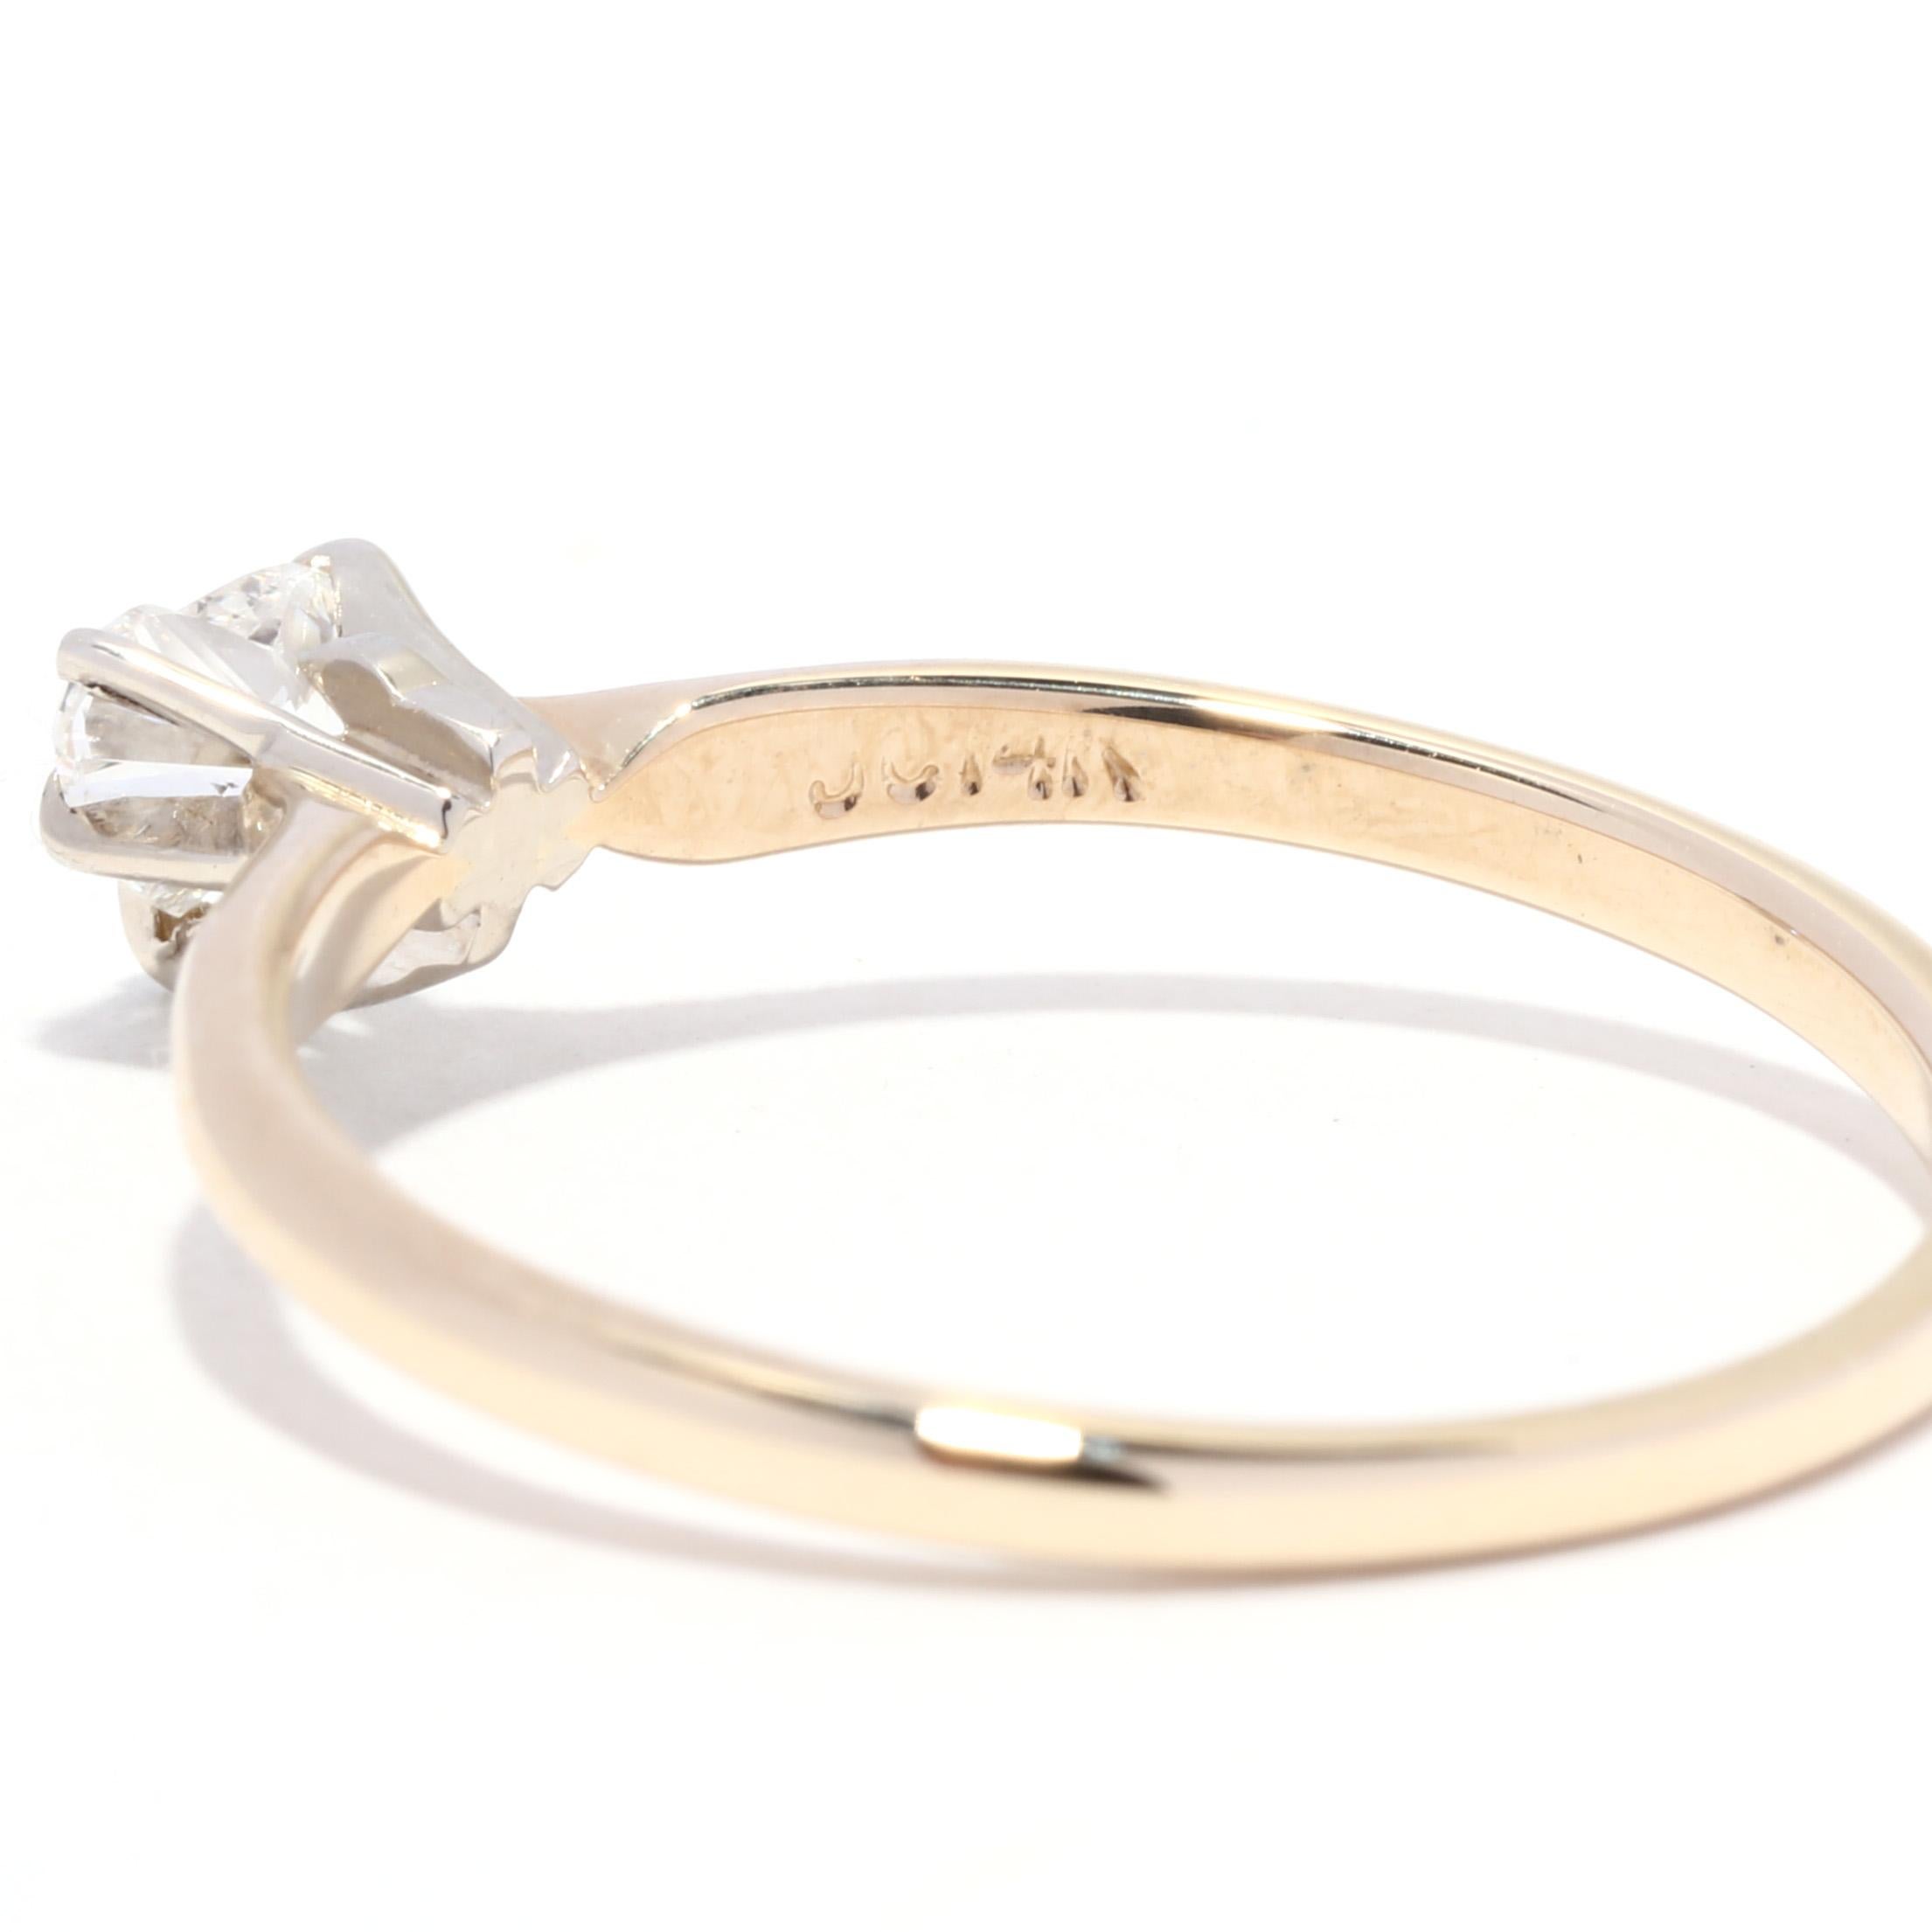 Women's or Men's Heart Cut Diamond Solitaire Engagement Ring, 14K Yellow Gold, Ring